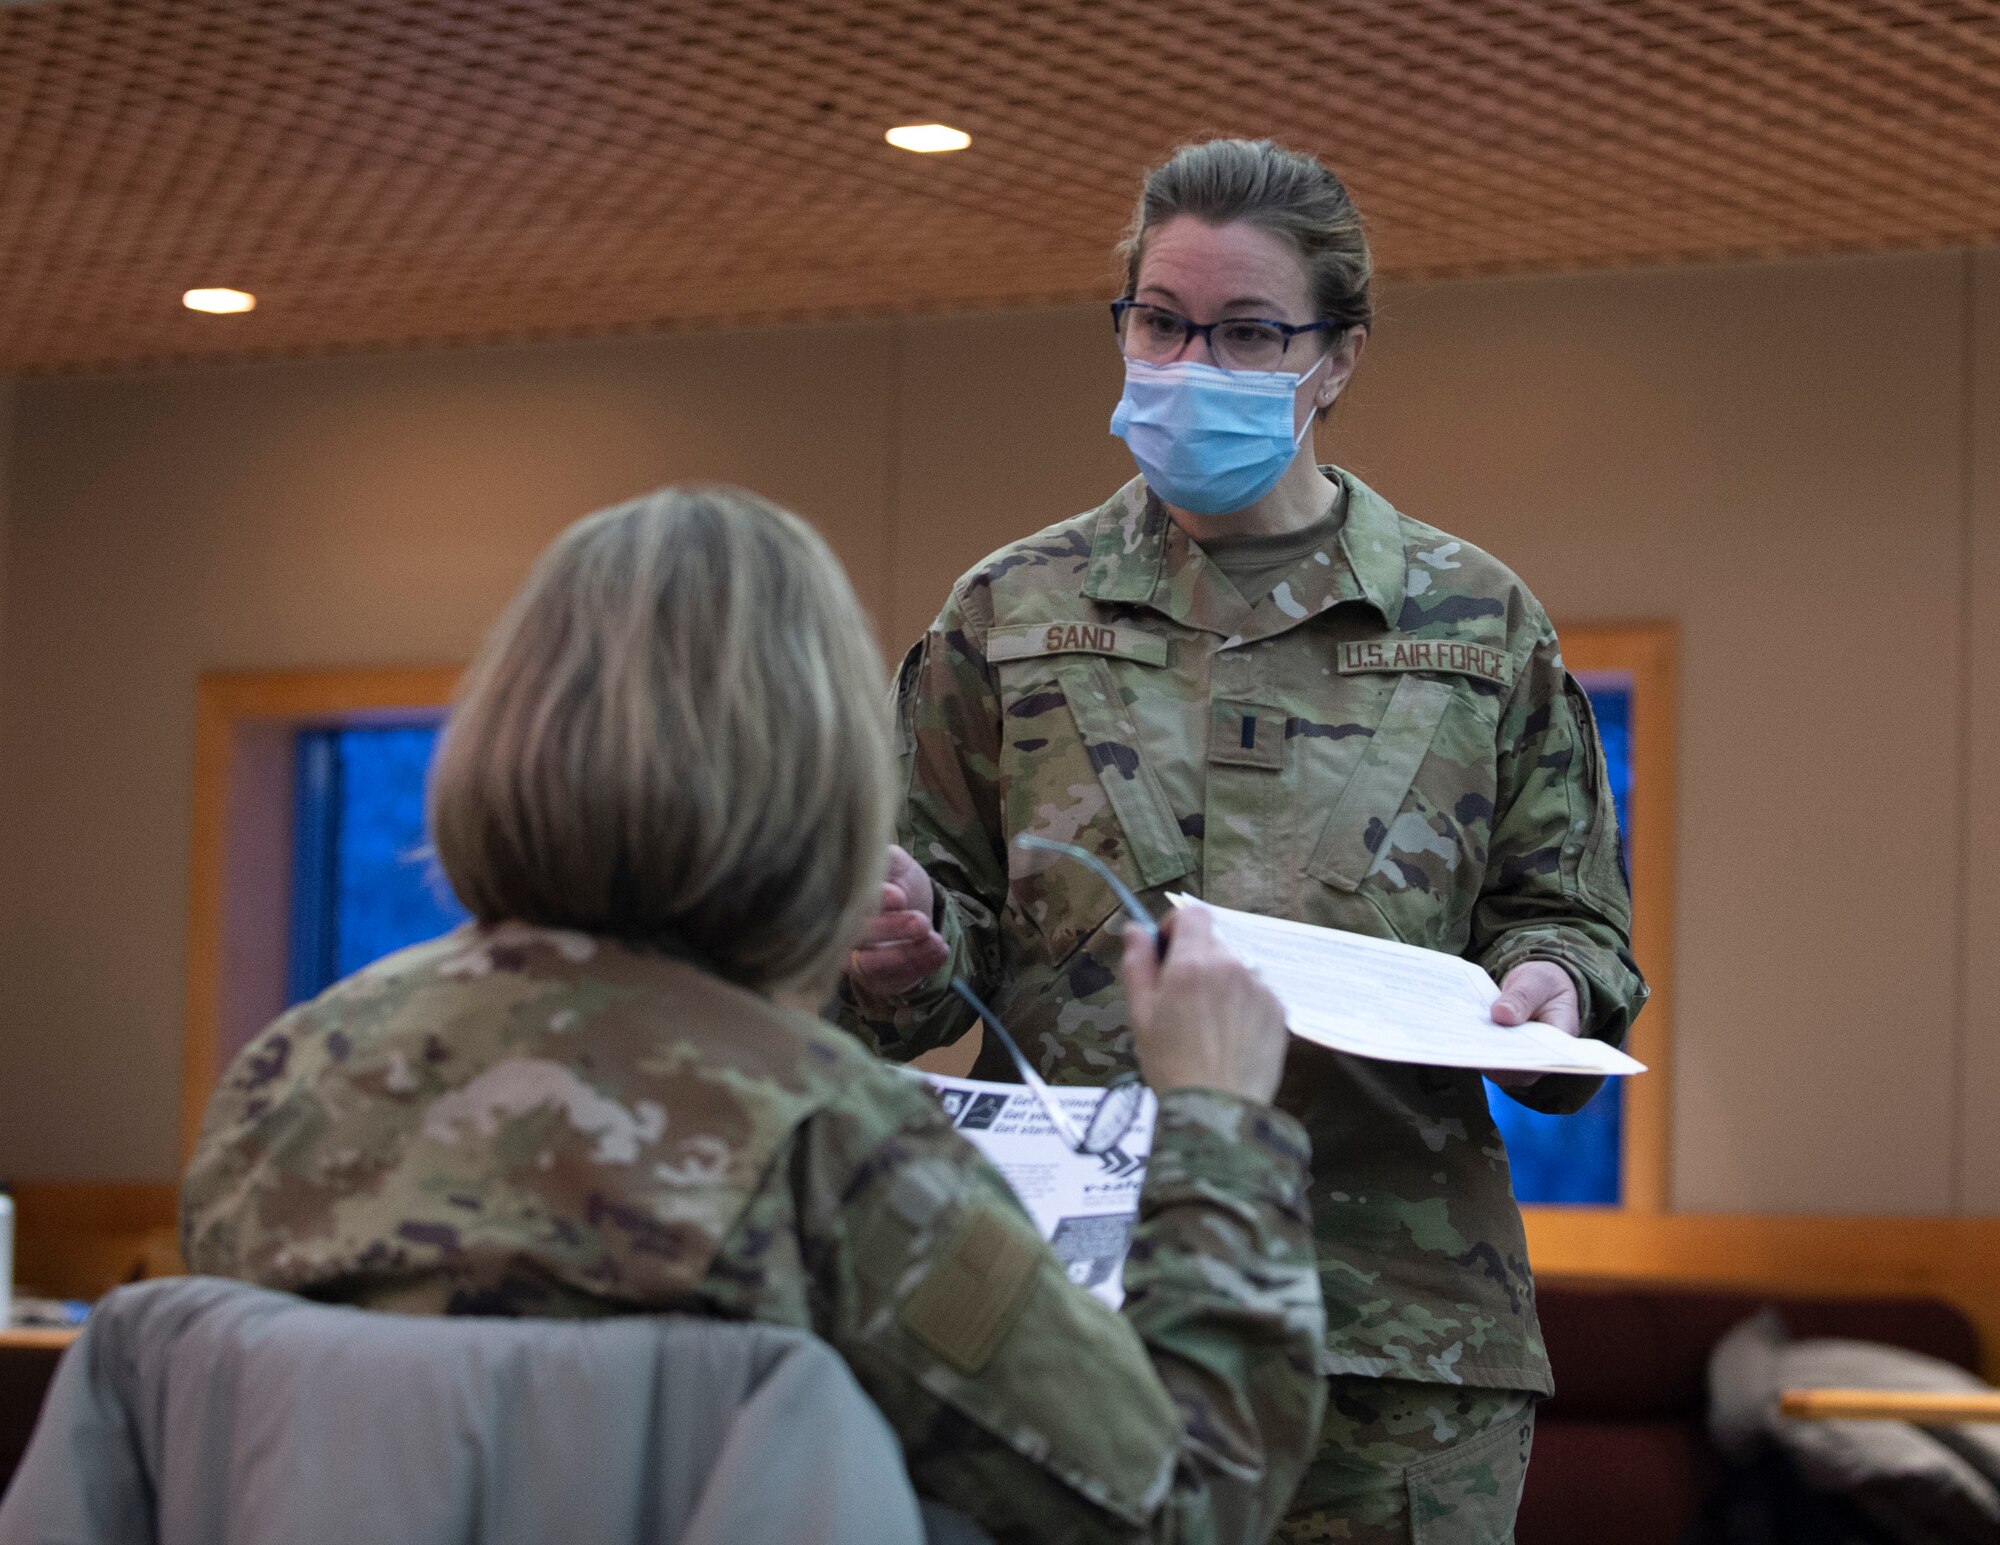 U.S. Air Force 1st Lt. Merci Sand, 133rd Medical Group, talks to Airmen while they wait after receiving the COVID-19 vaccine in St. Paul, Minn., Jan. 8, 2021.